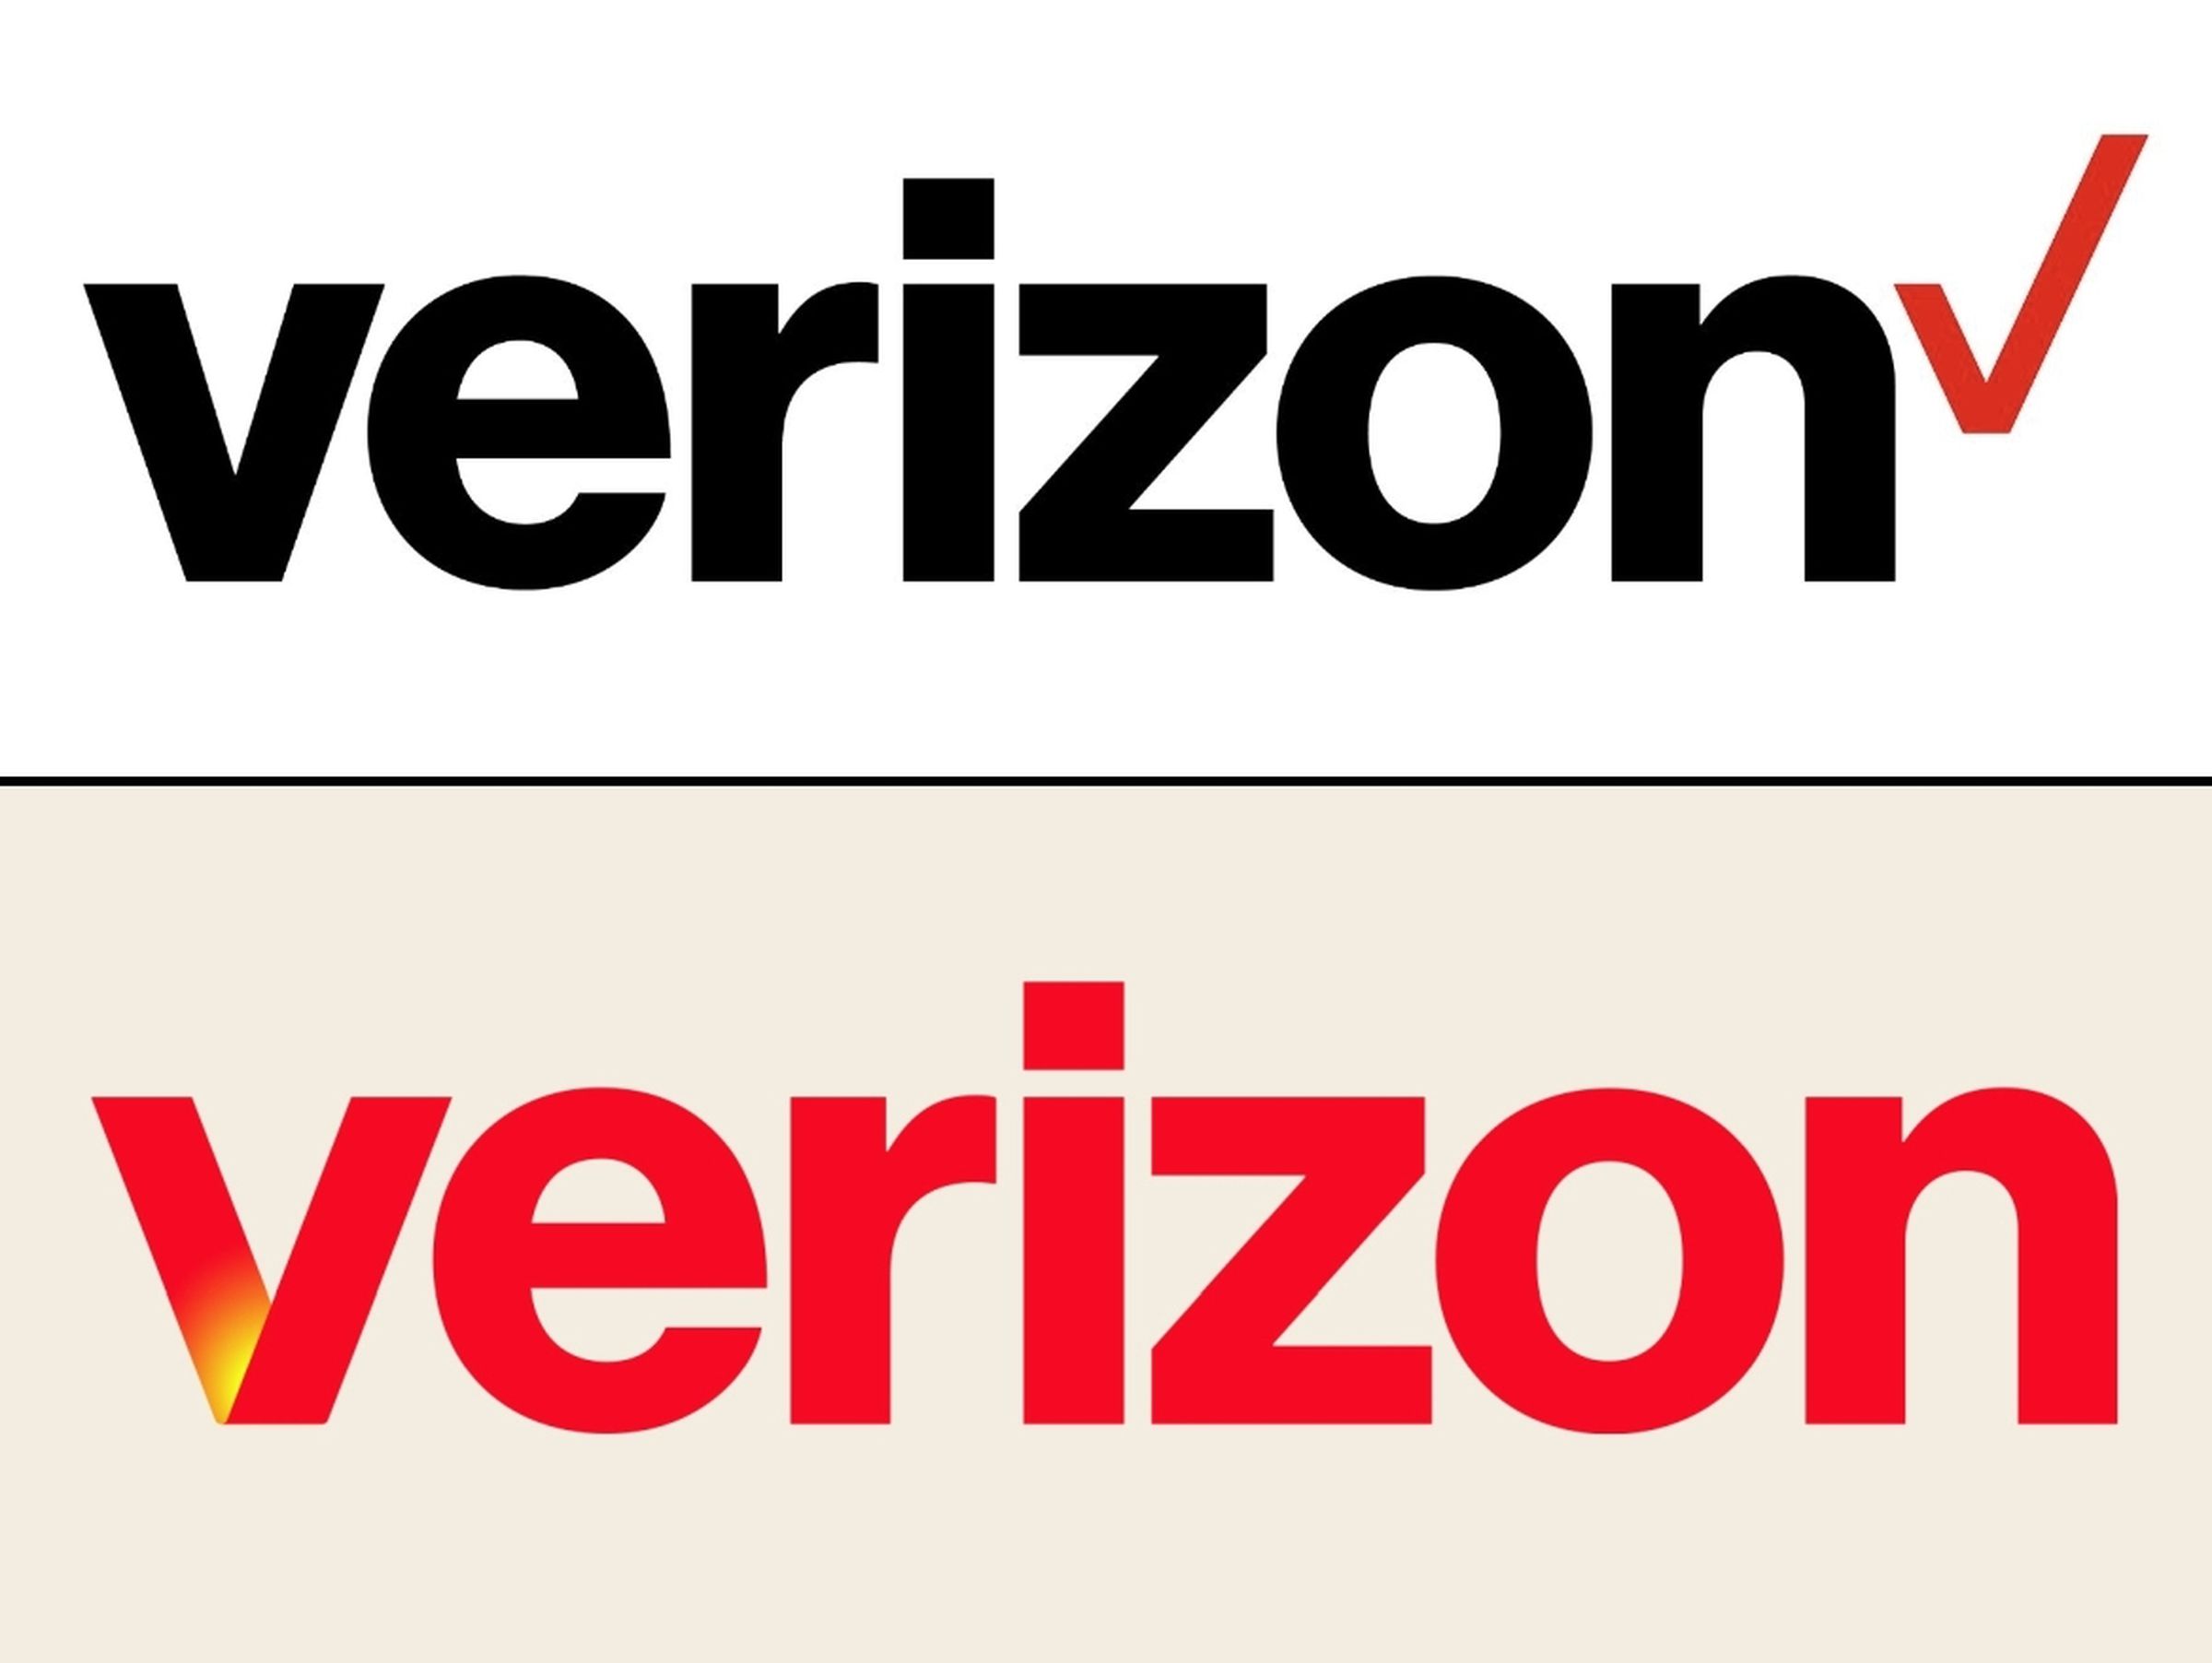 A comparison showing Verizon’s old black logo with a checkmark at the top, and the new red one at the bottom